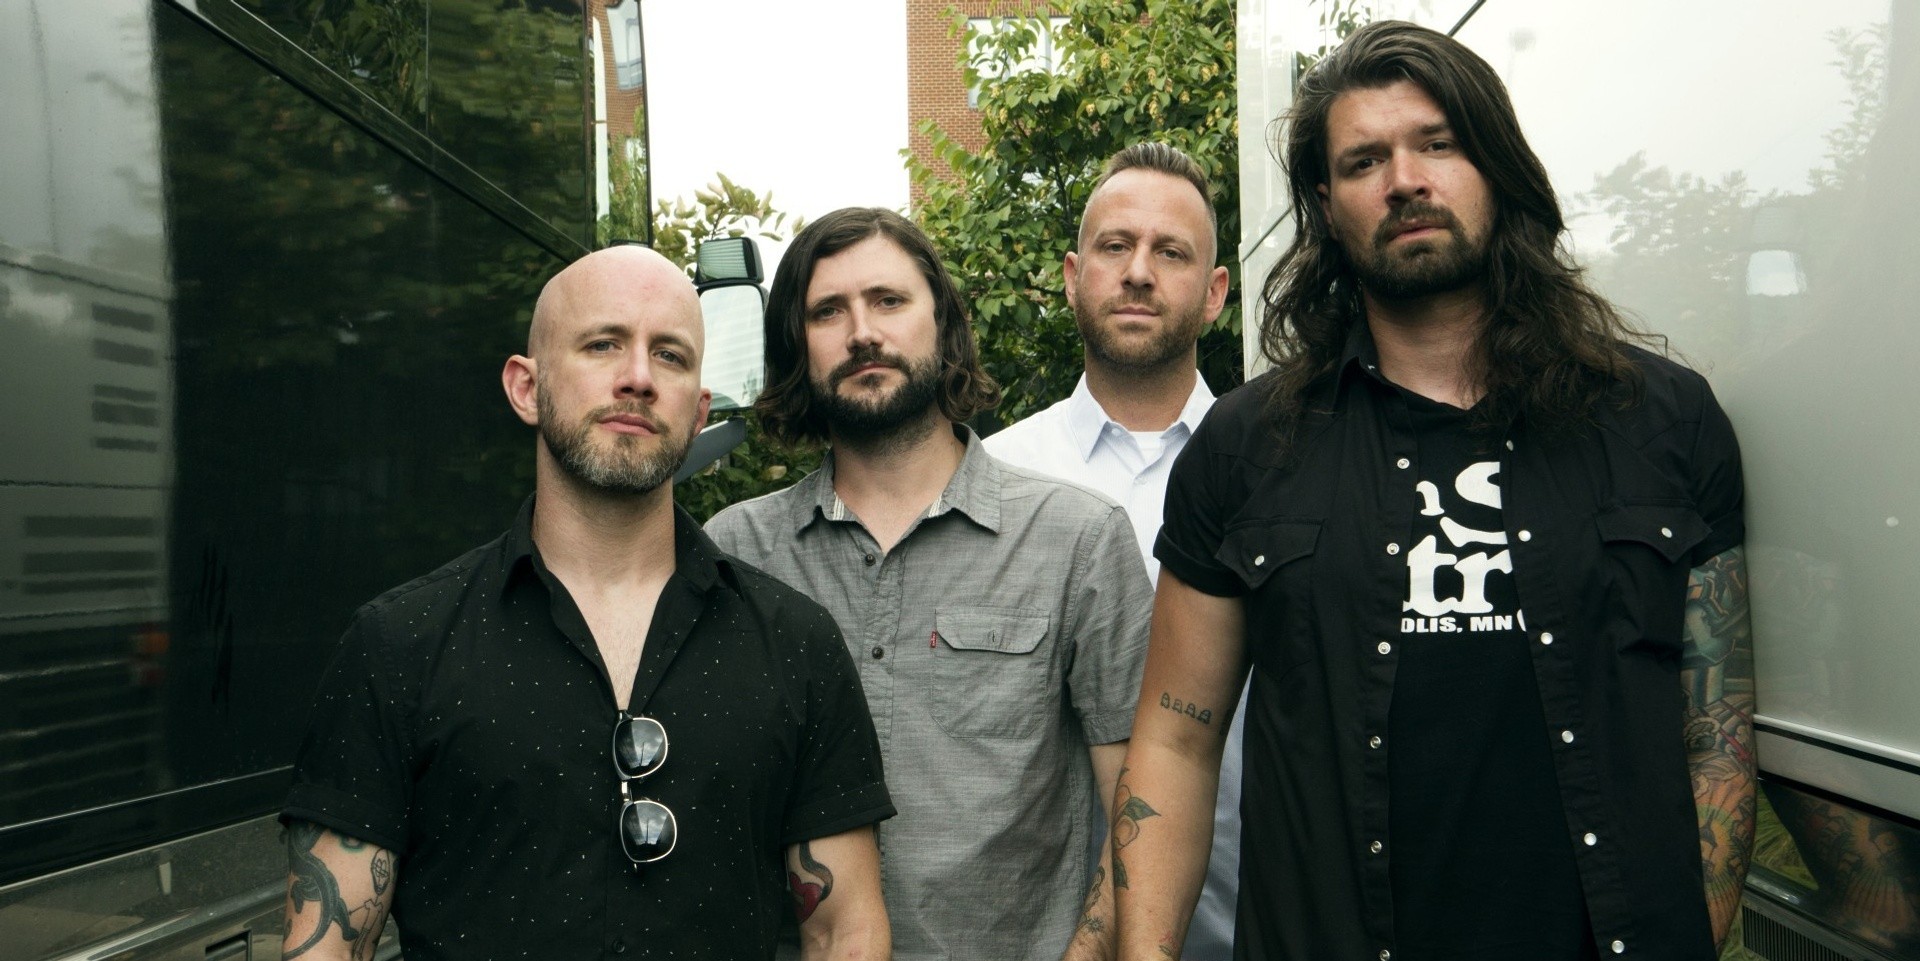 Ticketing and concert details for Taking Back Sunday's 2019 show in Singapore released